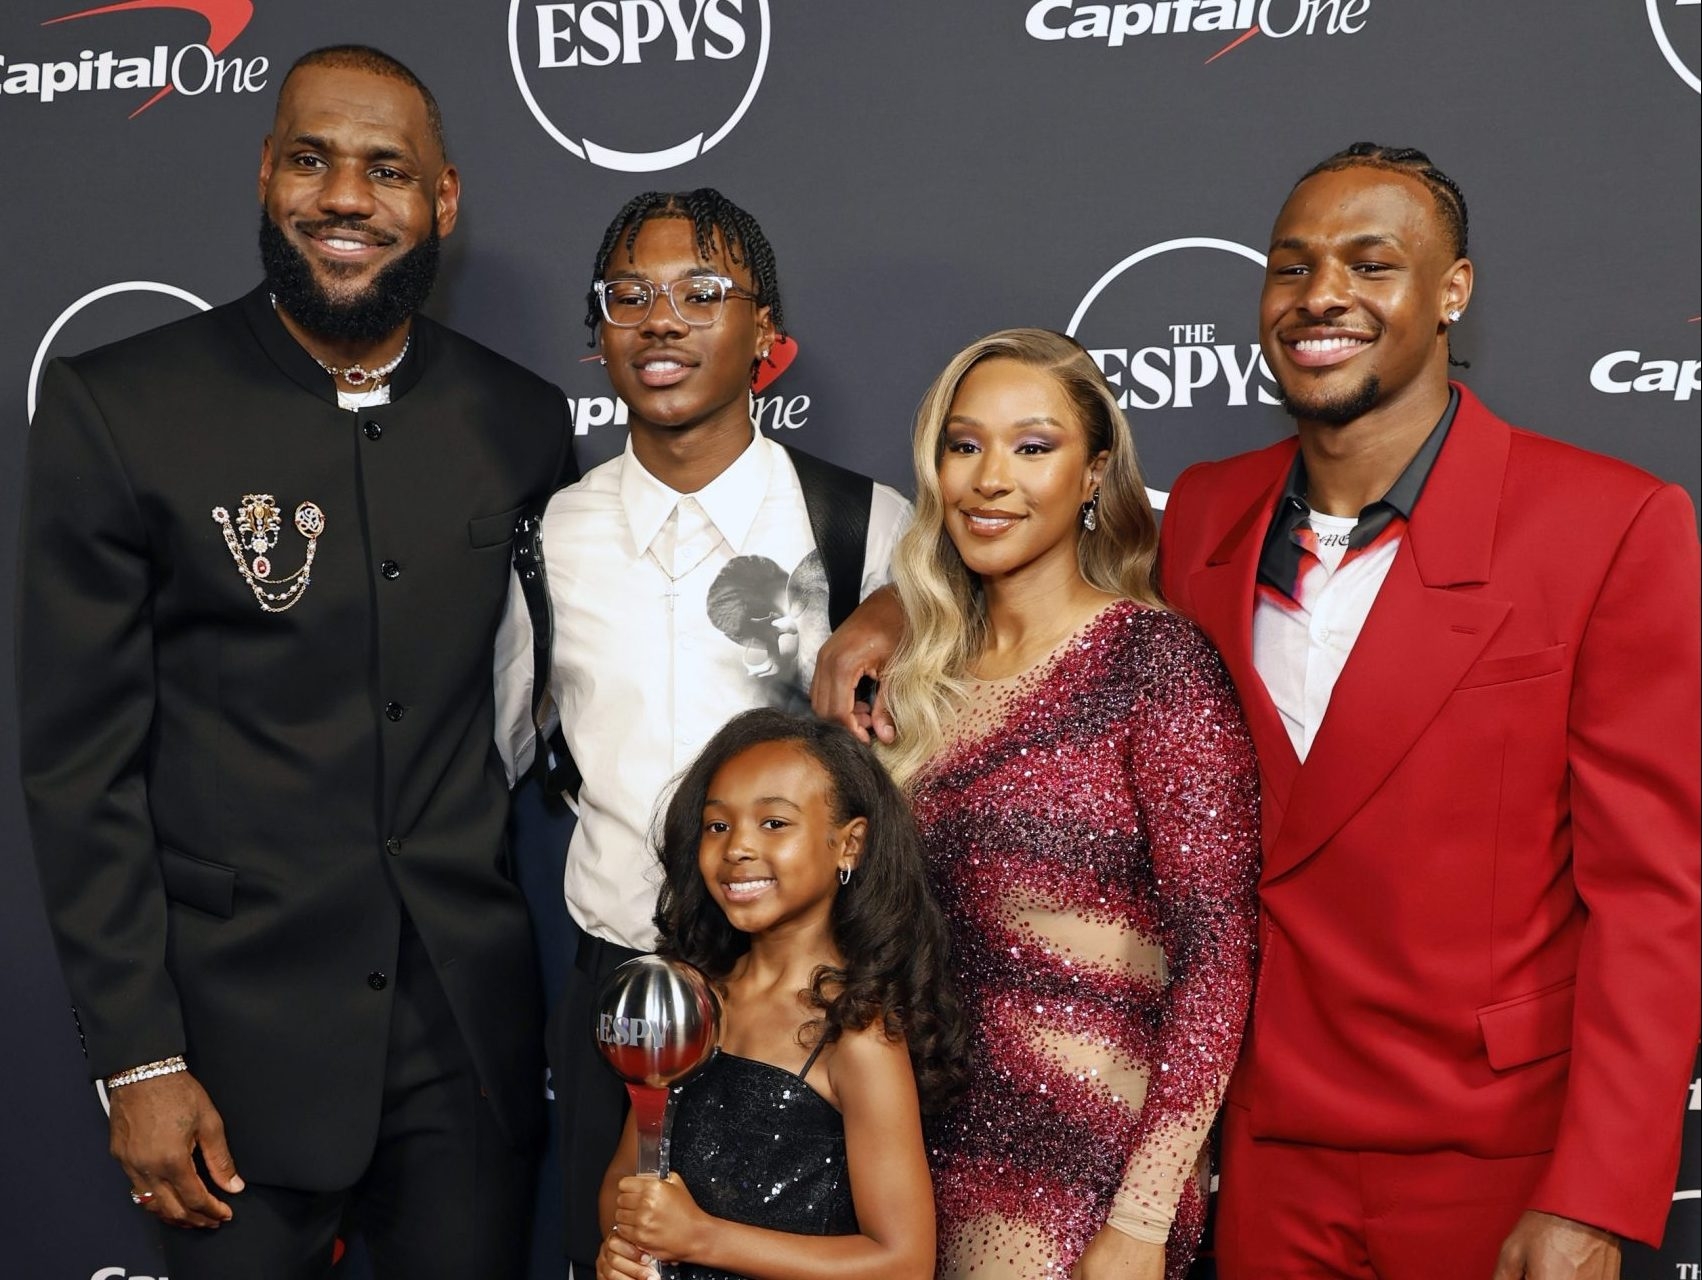 Bronny James stable after suffering cardiac arrest